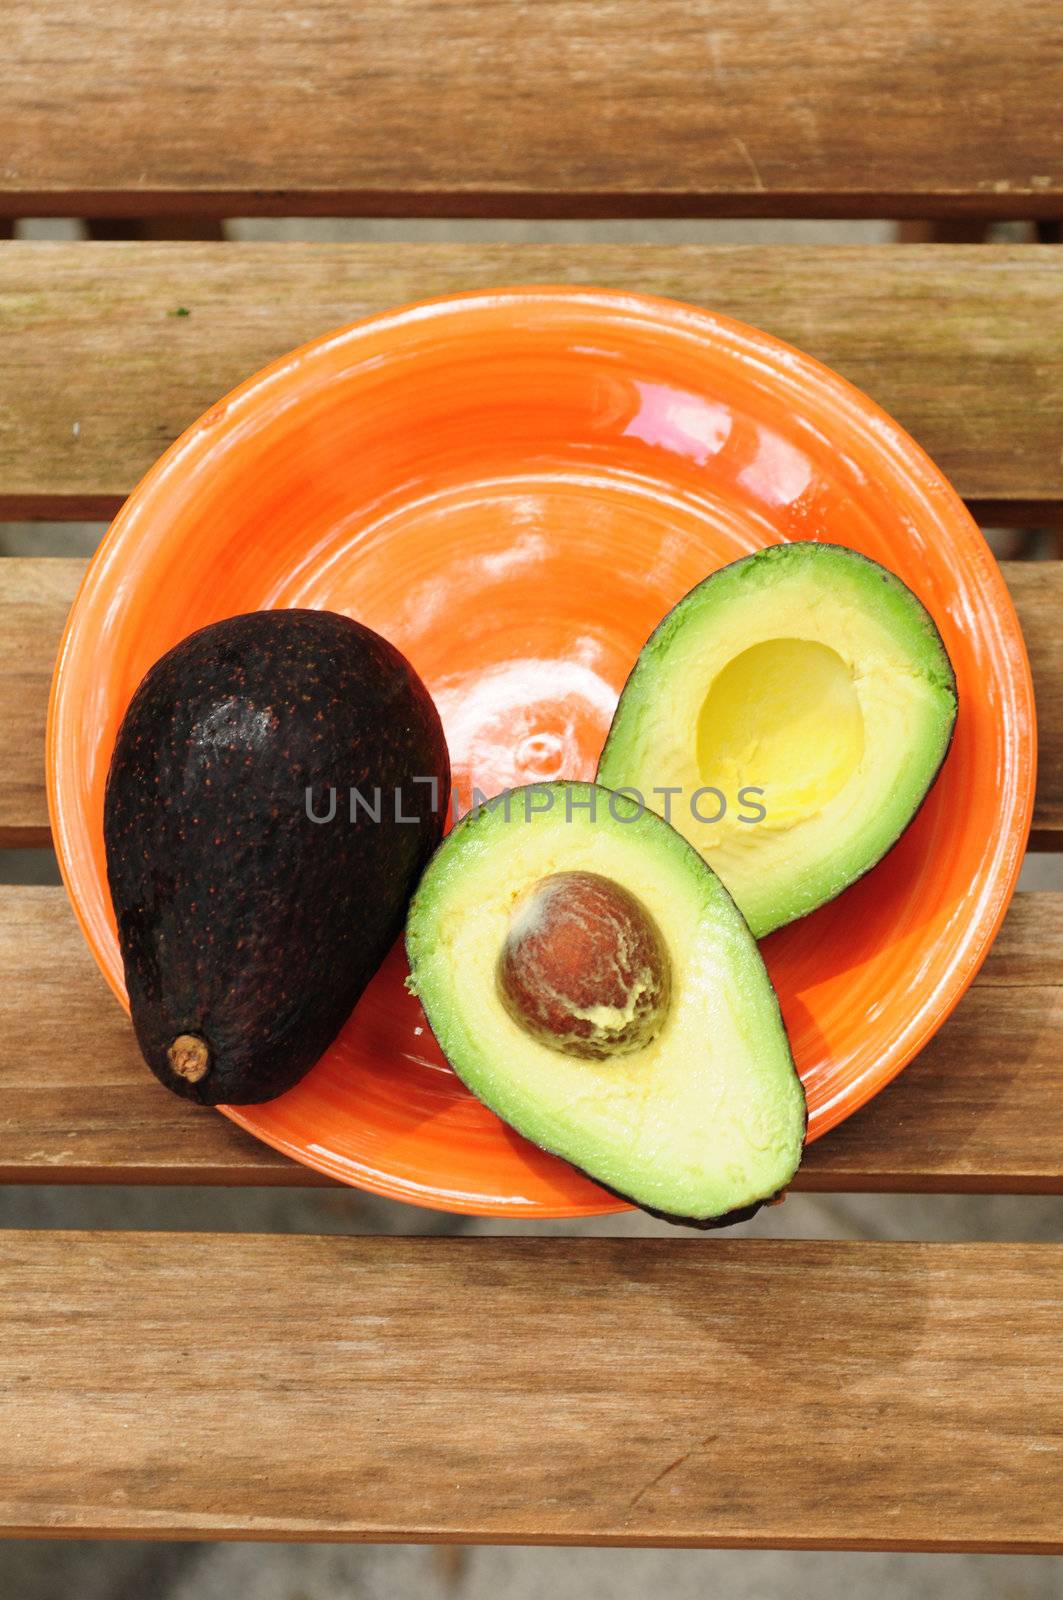 One whole and one sliced avocado on an orange plate